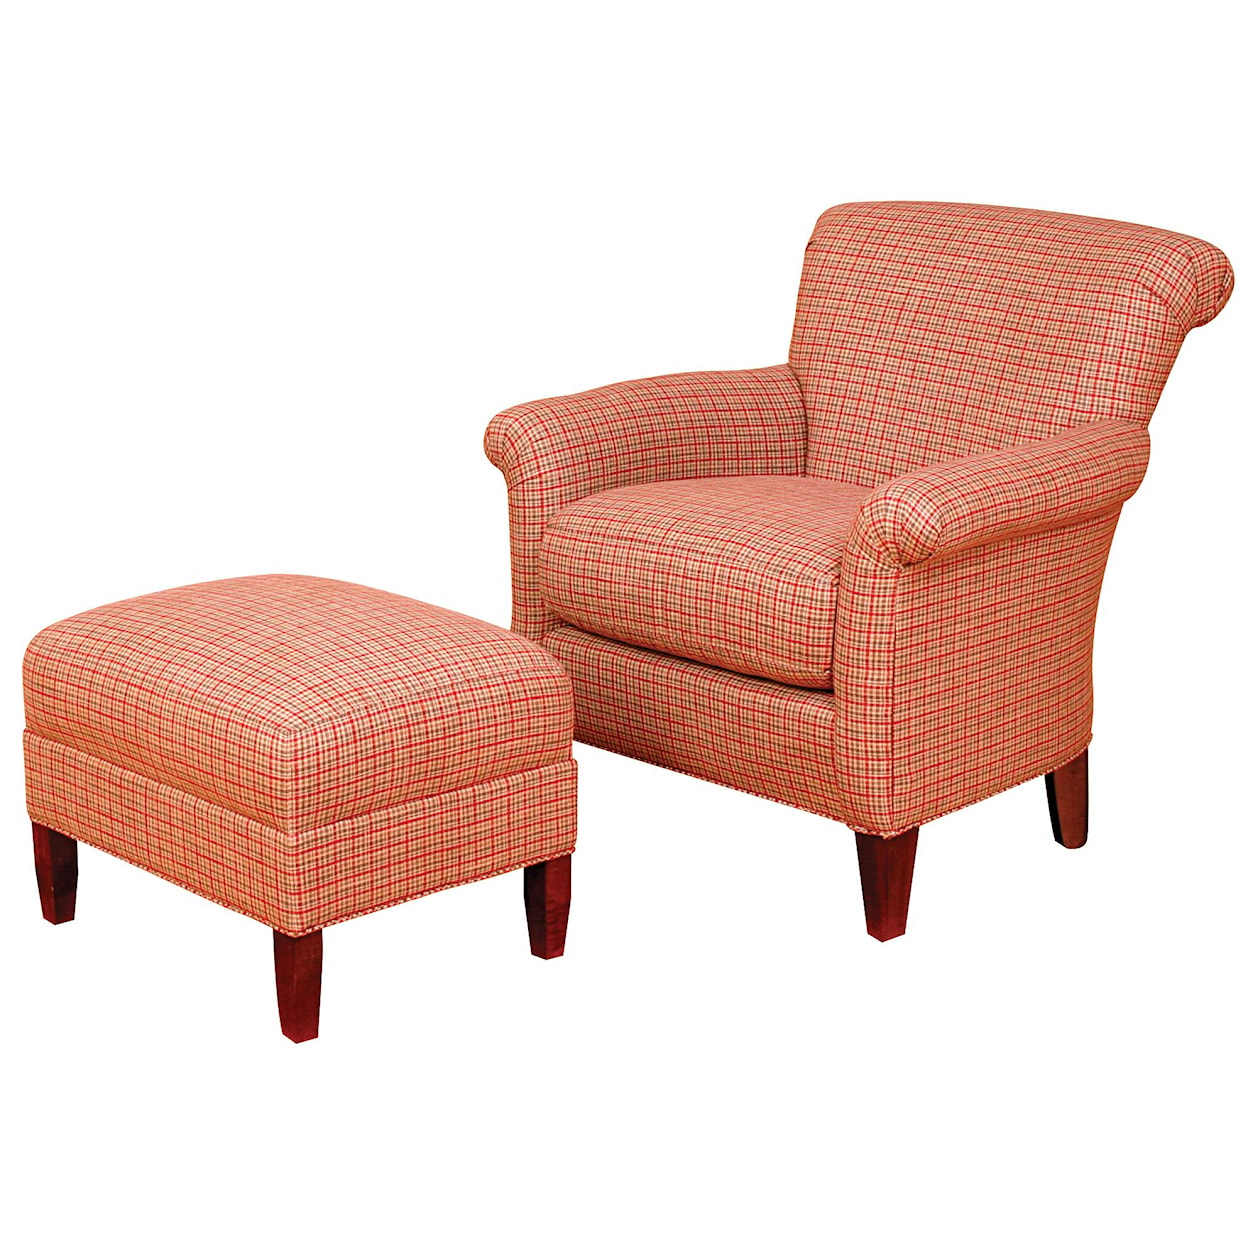 King Hickory King Hickory Accent Chairs and Ottomans Upholstered Francis Ottoman